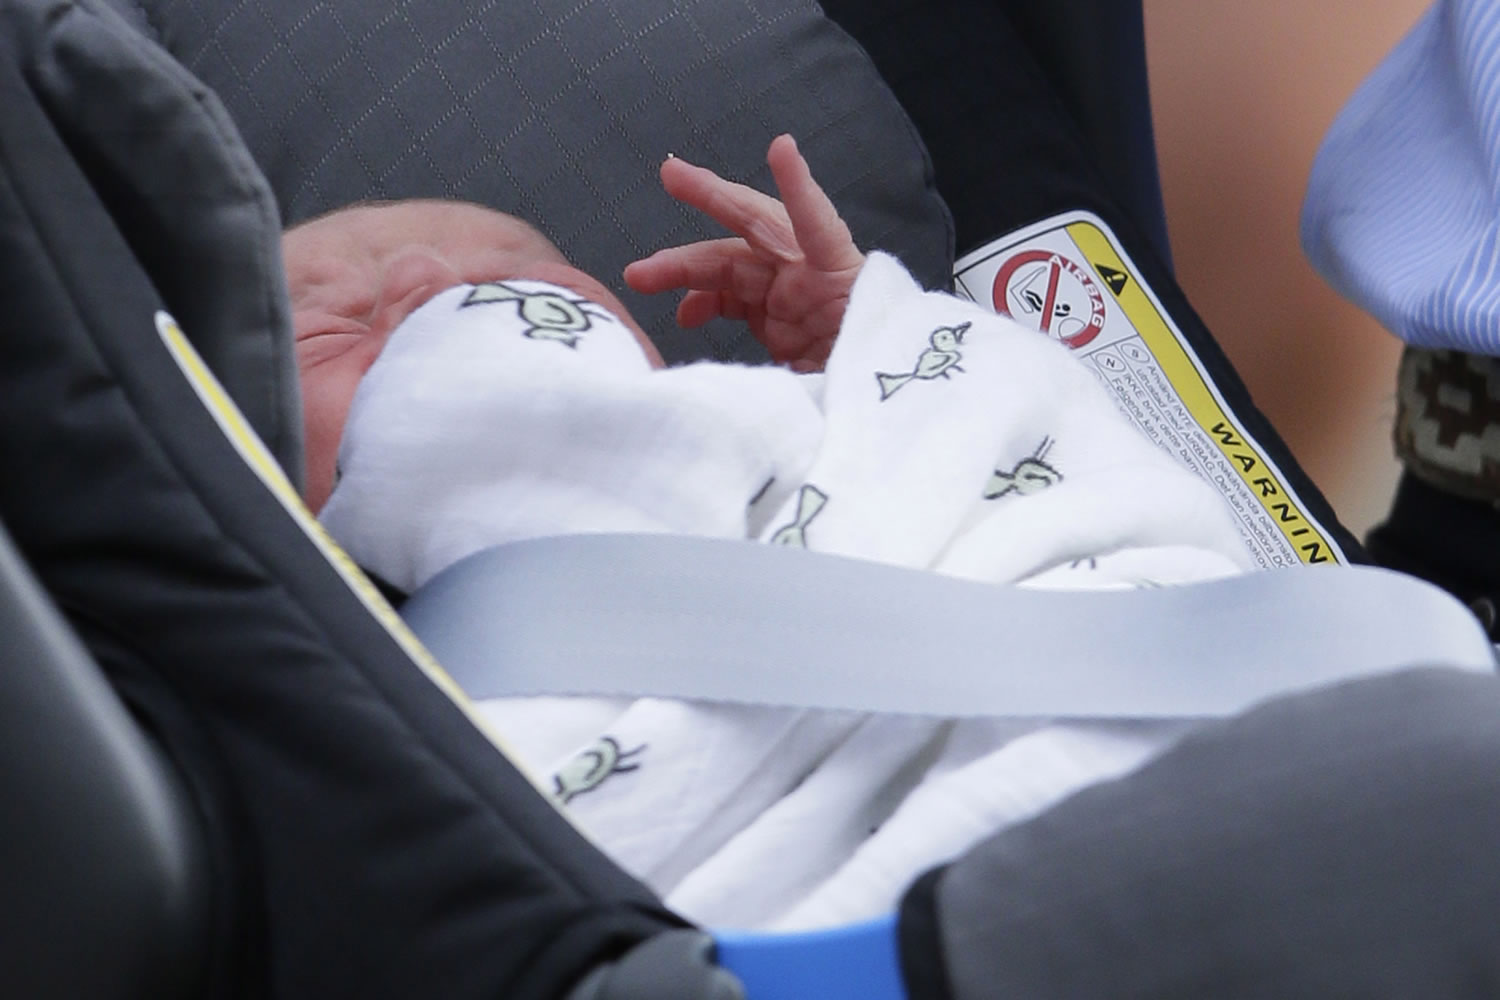 Prince George of Cambridge lays in a car seat July 23 as his parents, Britain's Prince William and Kate, Duchess of Cambridge leave St.